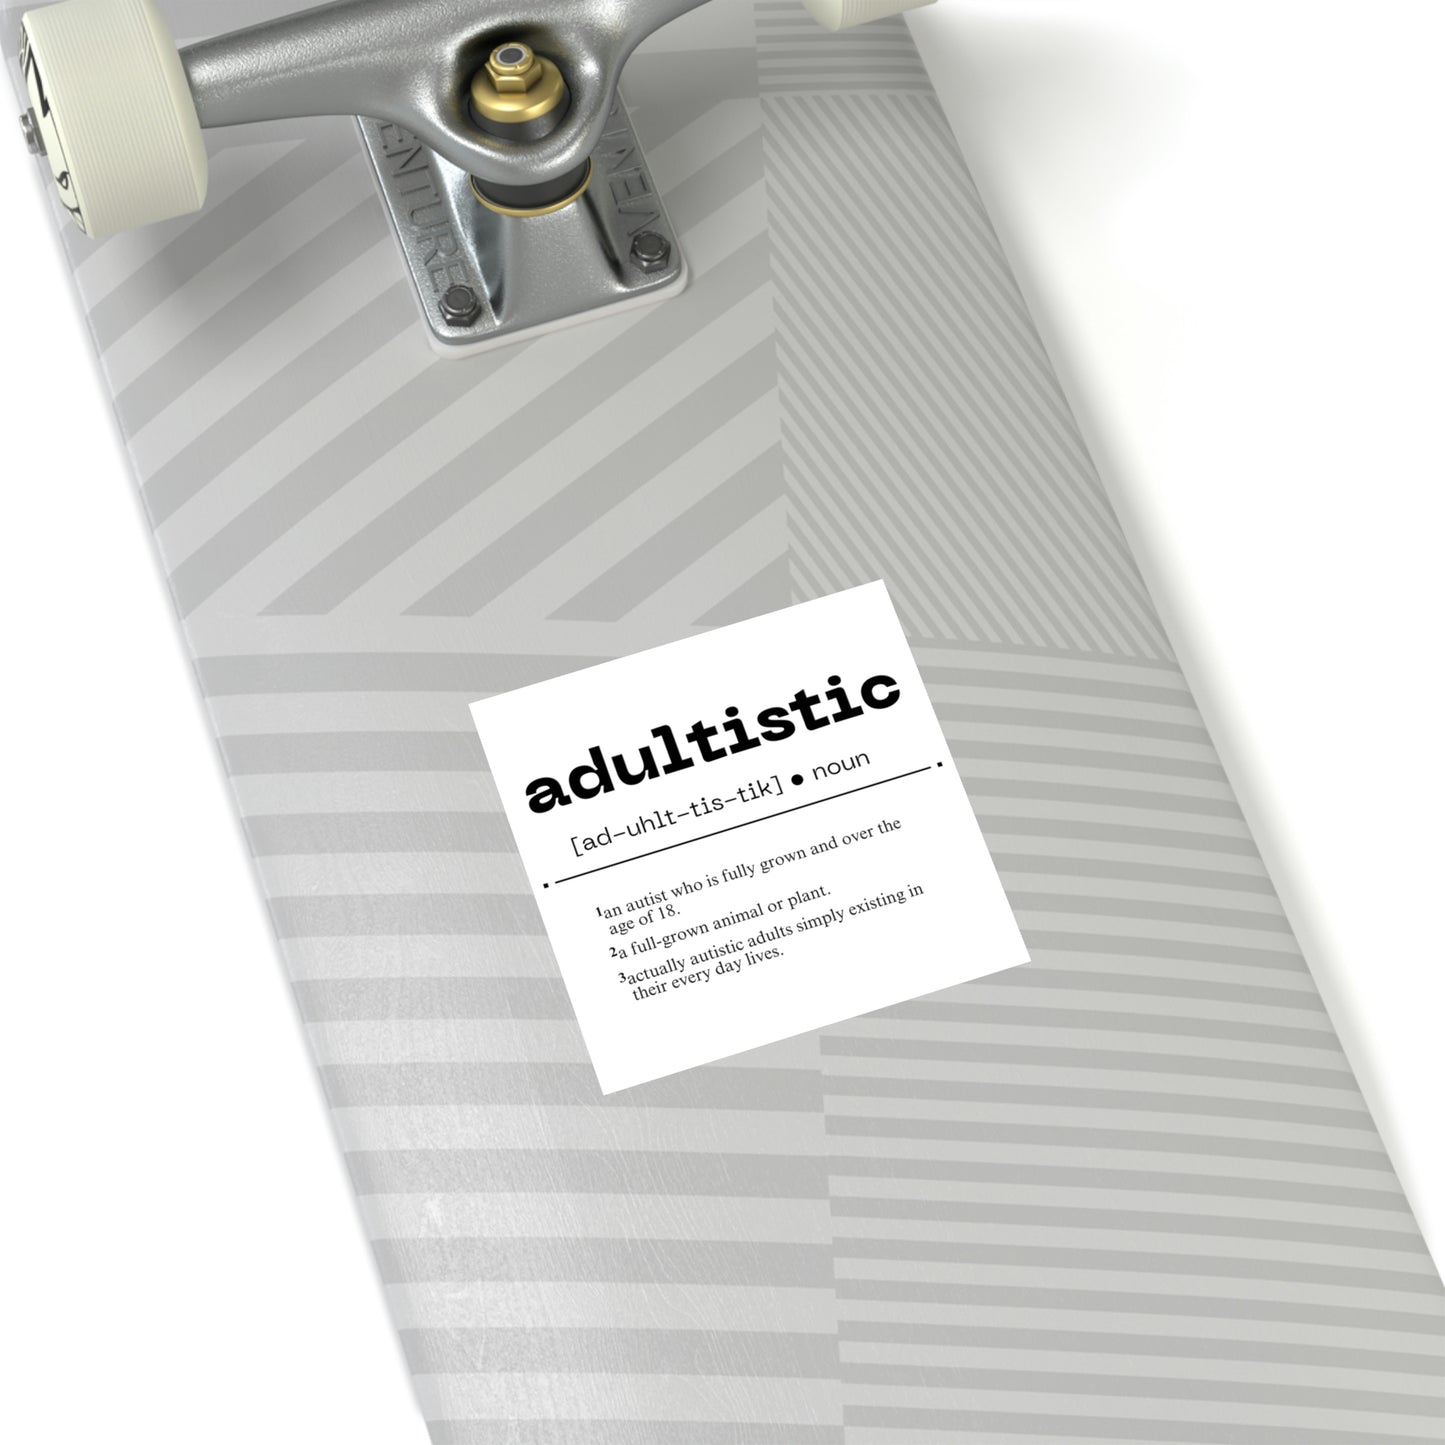 Adultistic [Redefined] Square Stickers [Indoor\Outdoor]